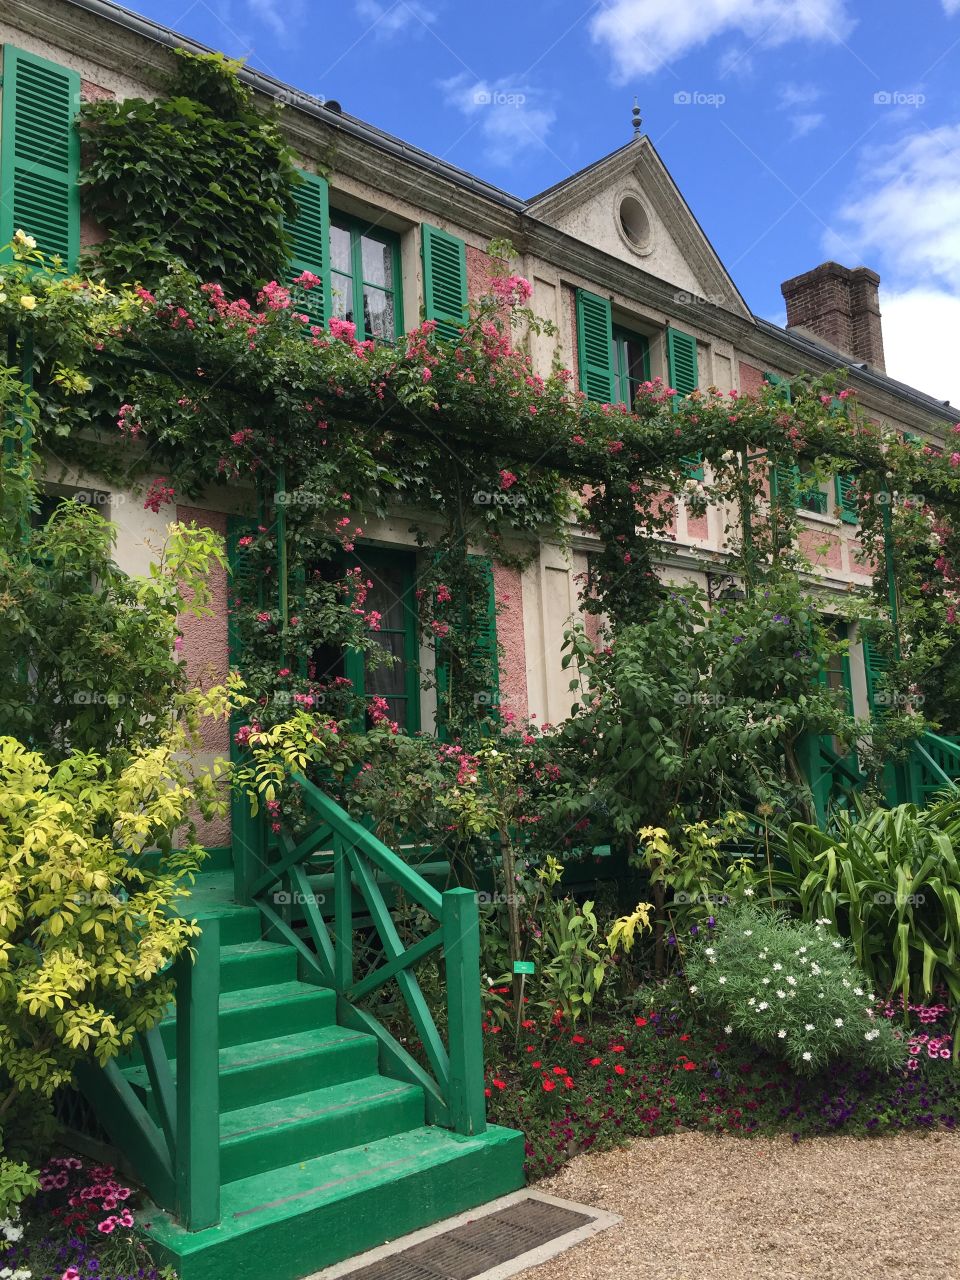 Claude Monet's house at Giverny